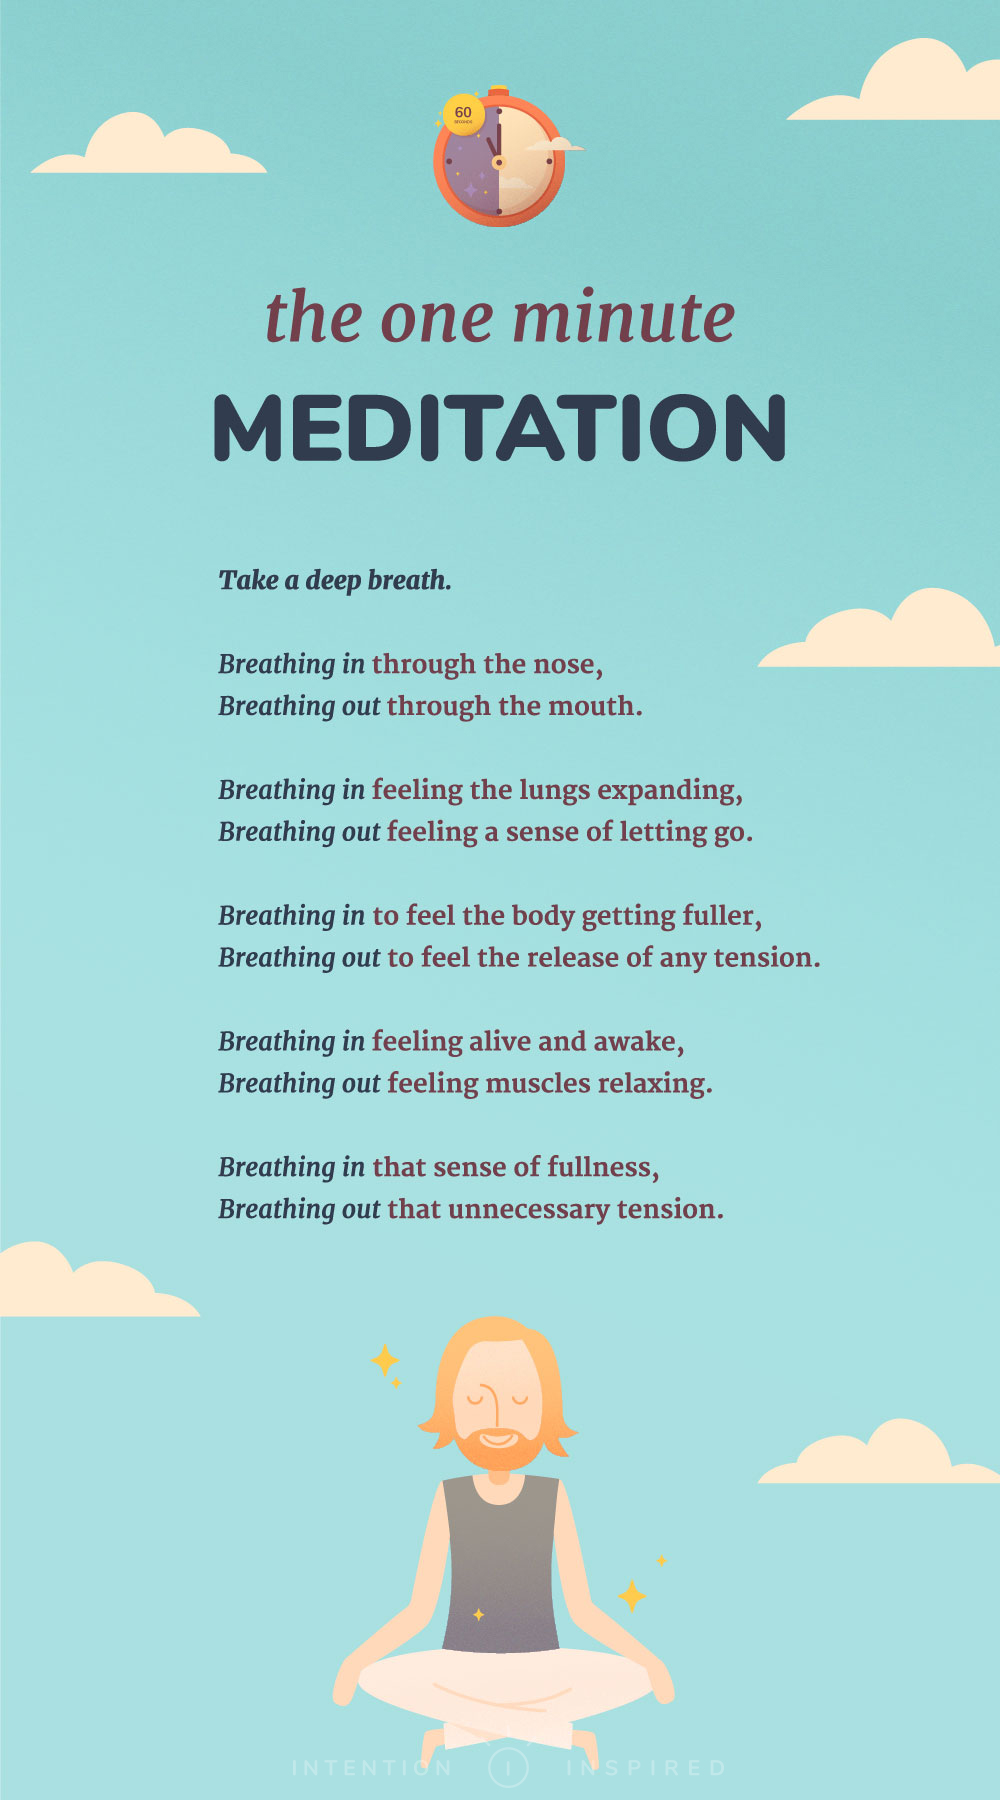 One Minute Meditation: steps on how to meditate